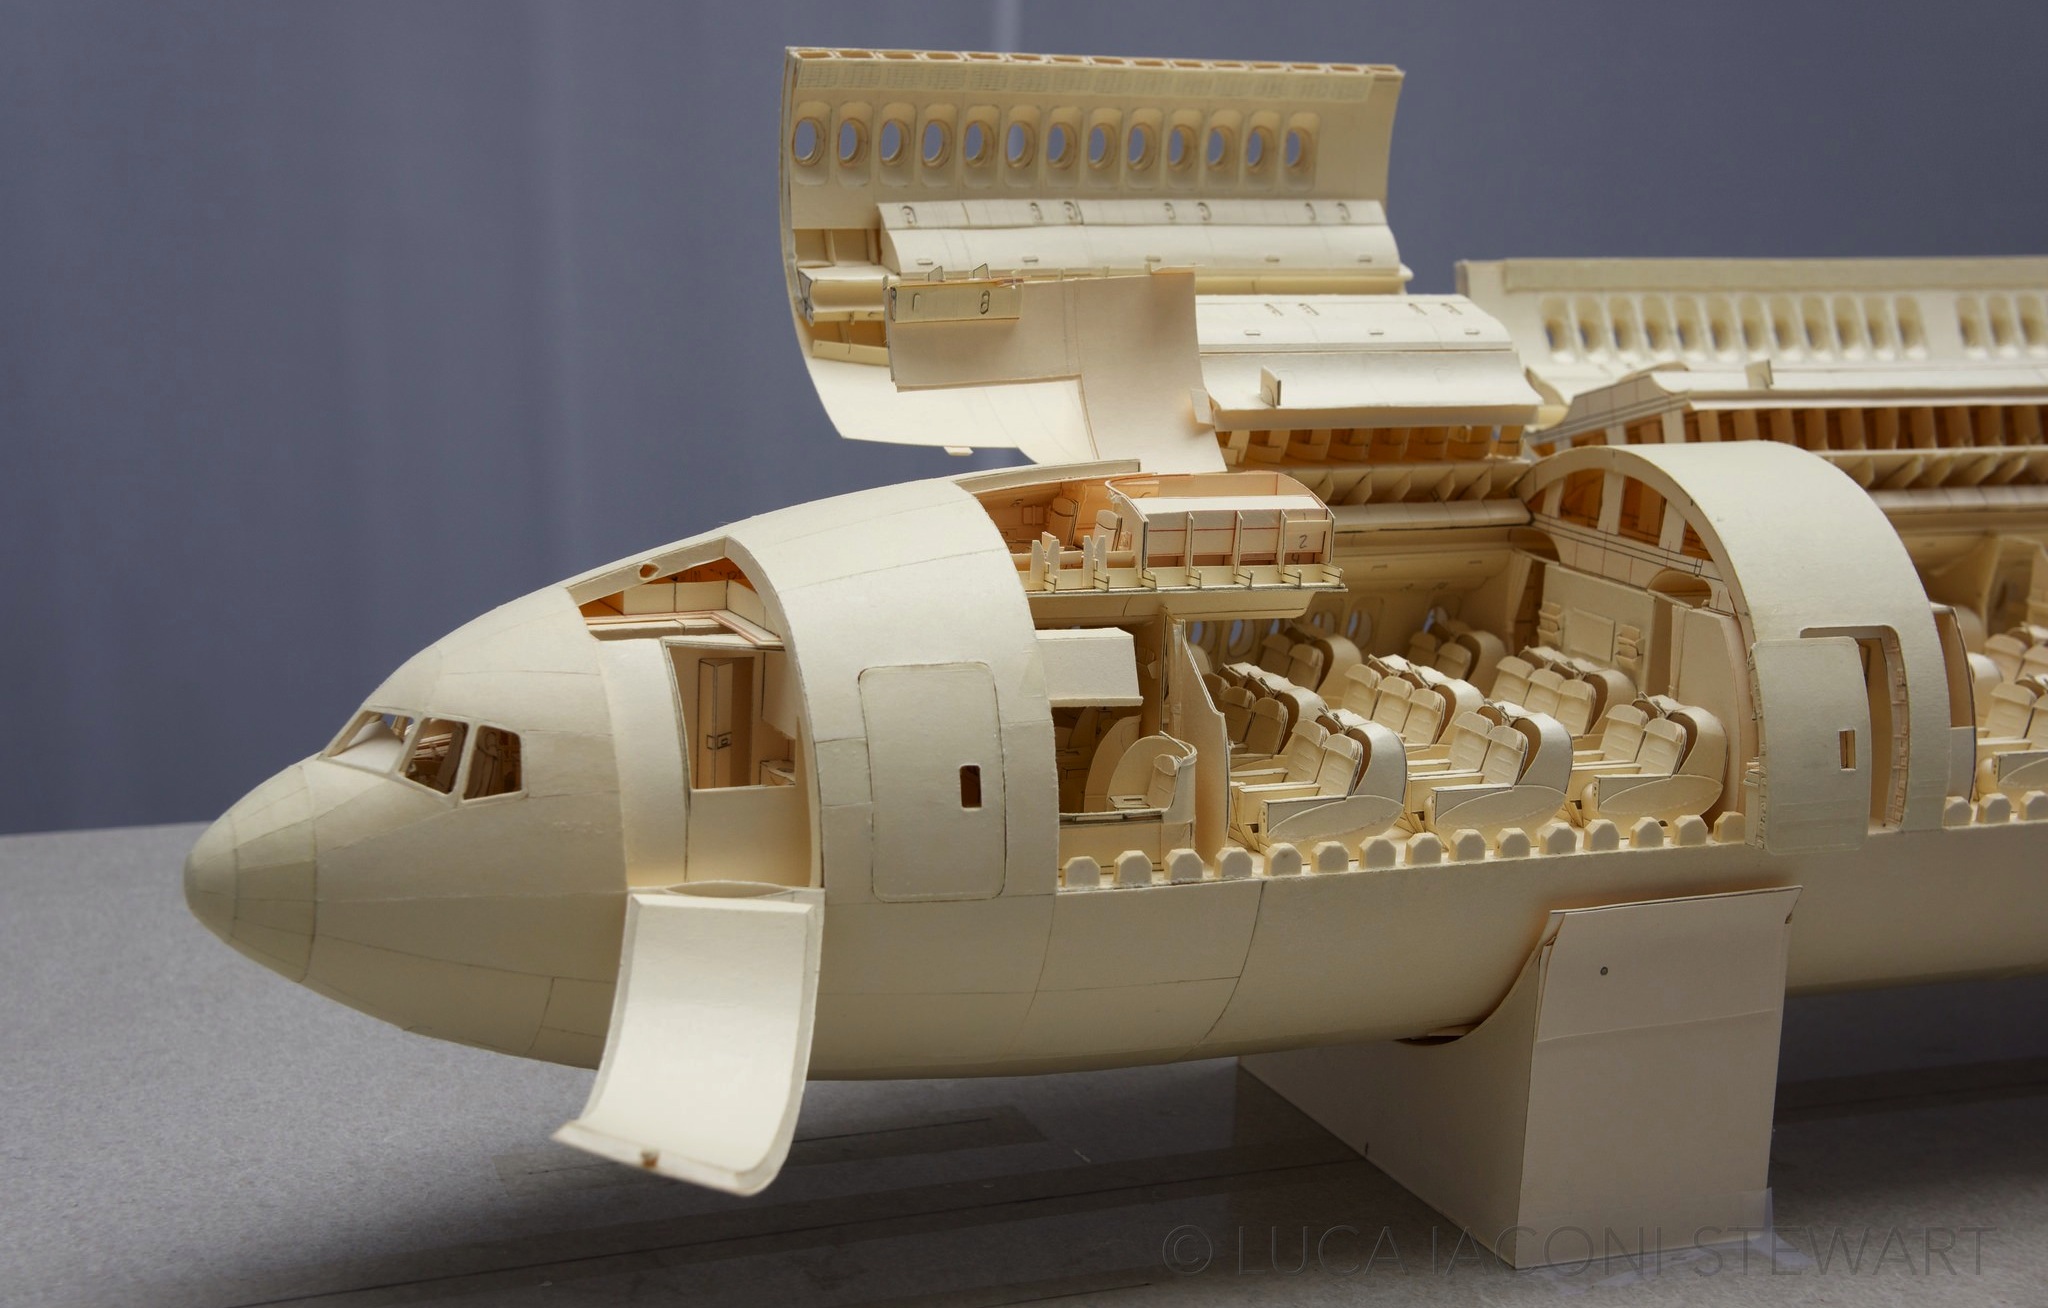 23yo makes ultra-detailed 1:60 scale Boeing 777 out of paper